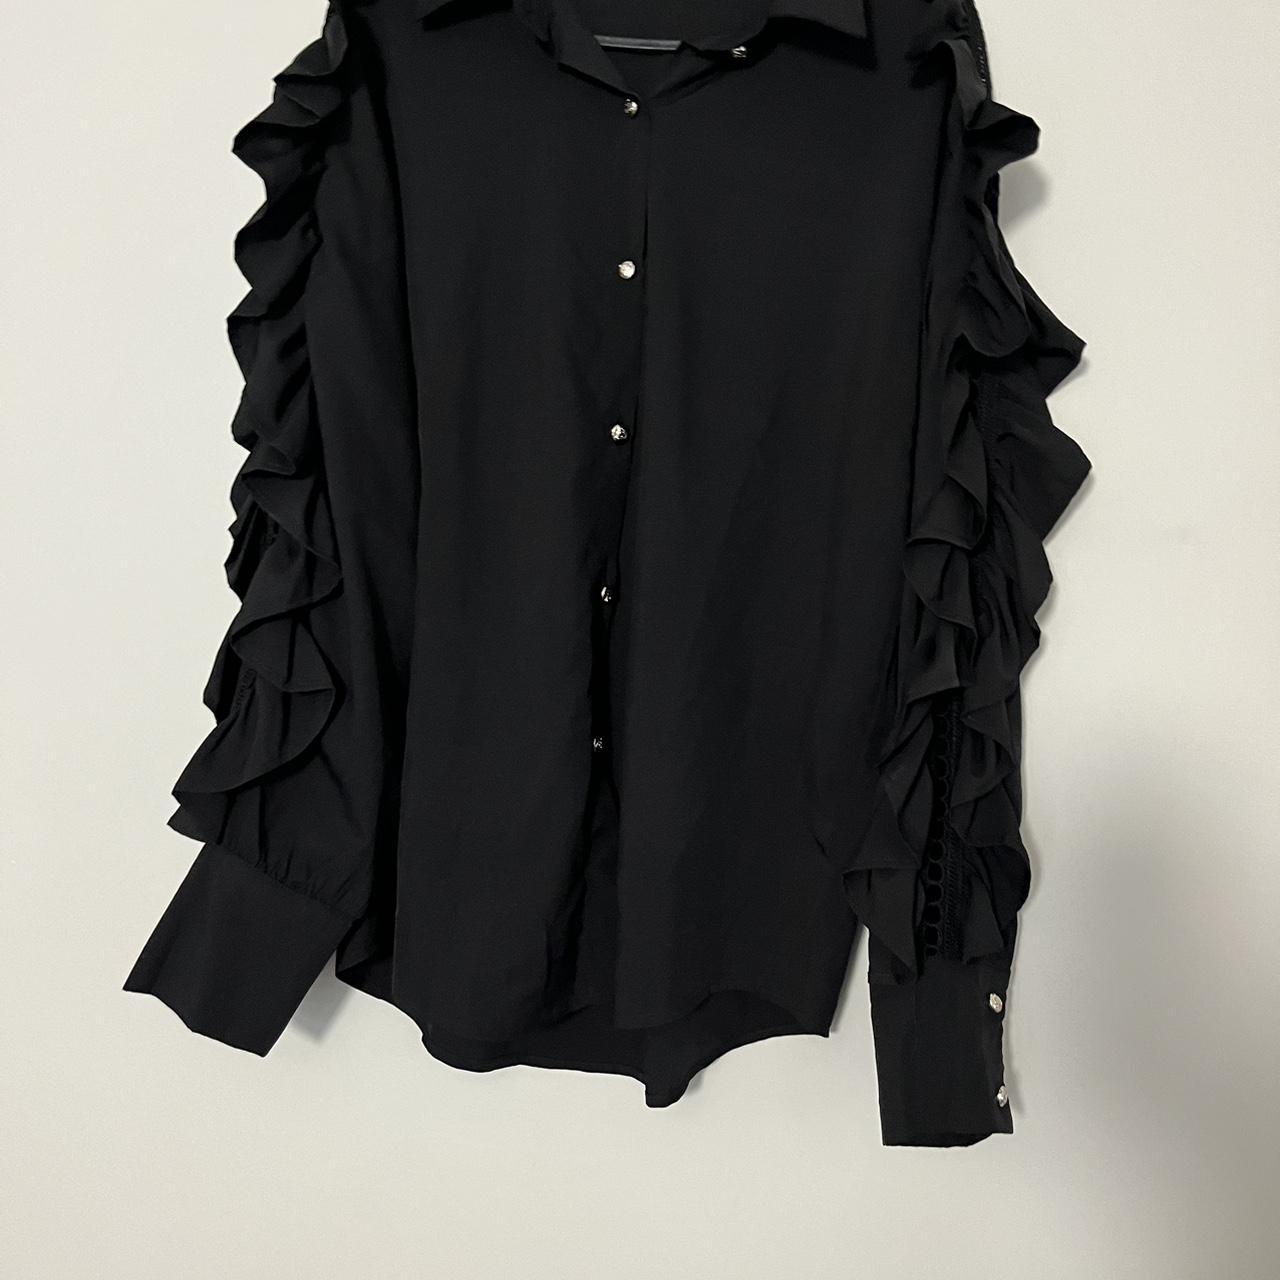 Black ruffle shirt bought in a boutique in... - Depop